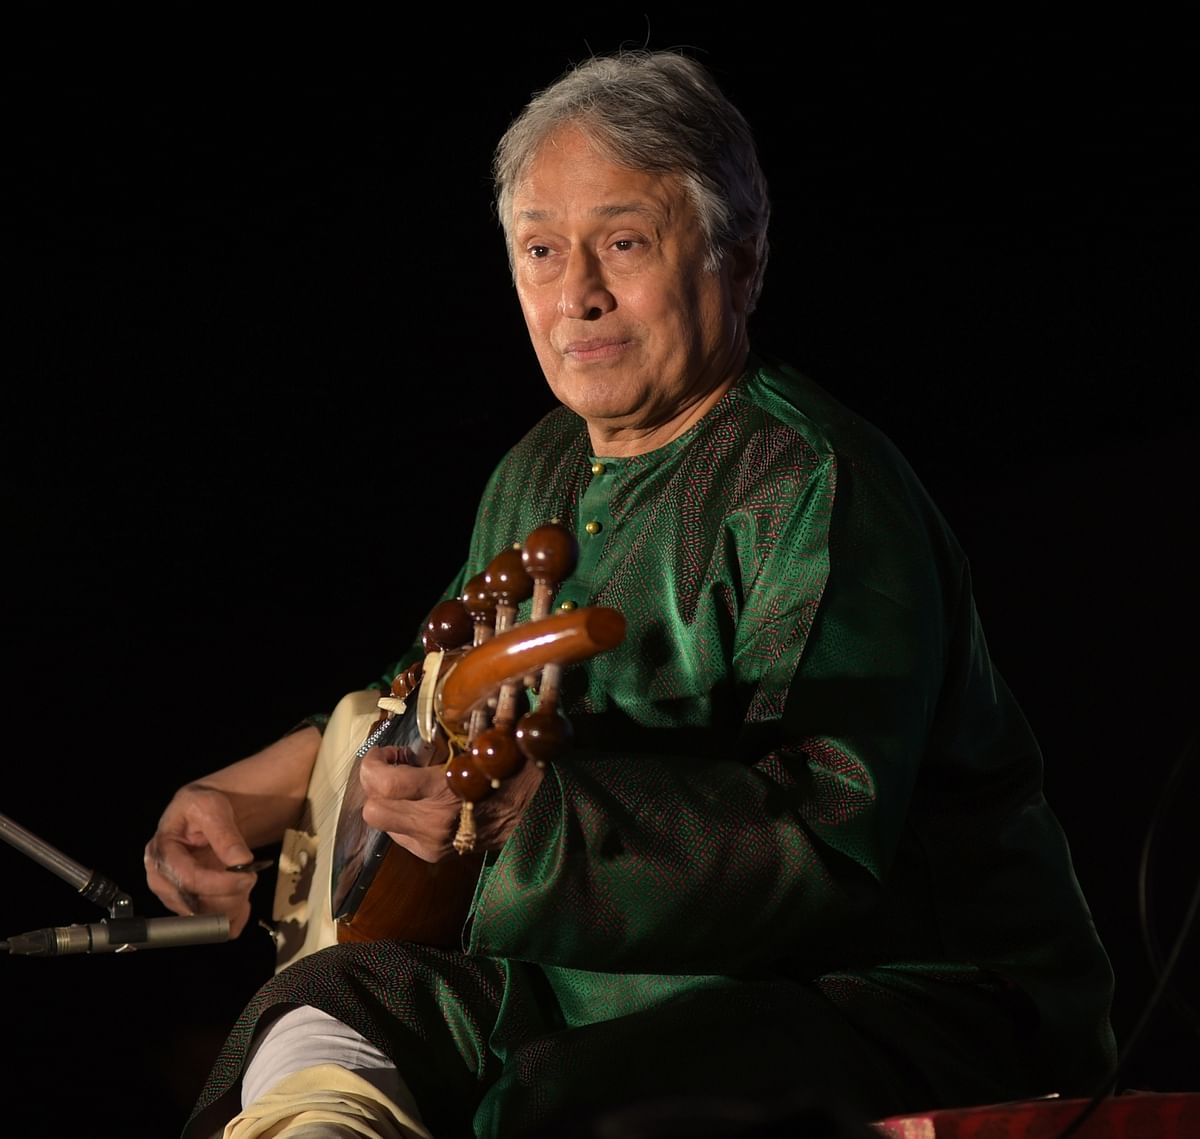 On Ustad Amjad Ali Khan’s birthday, a throwback to his thoughts on the changing trends in music.